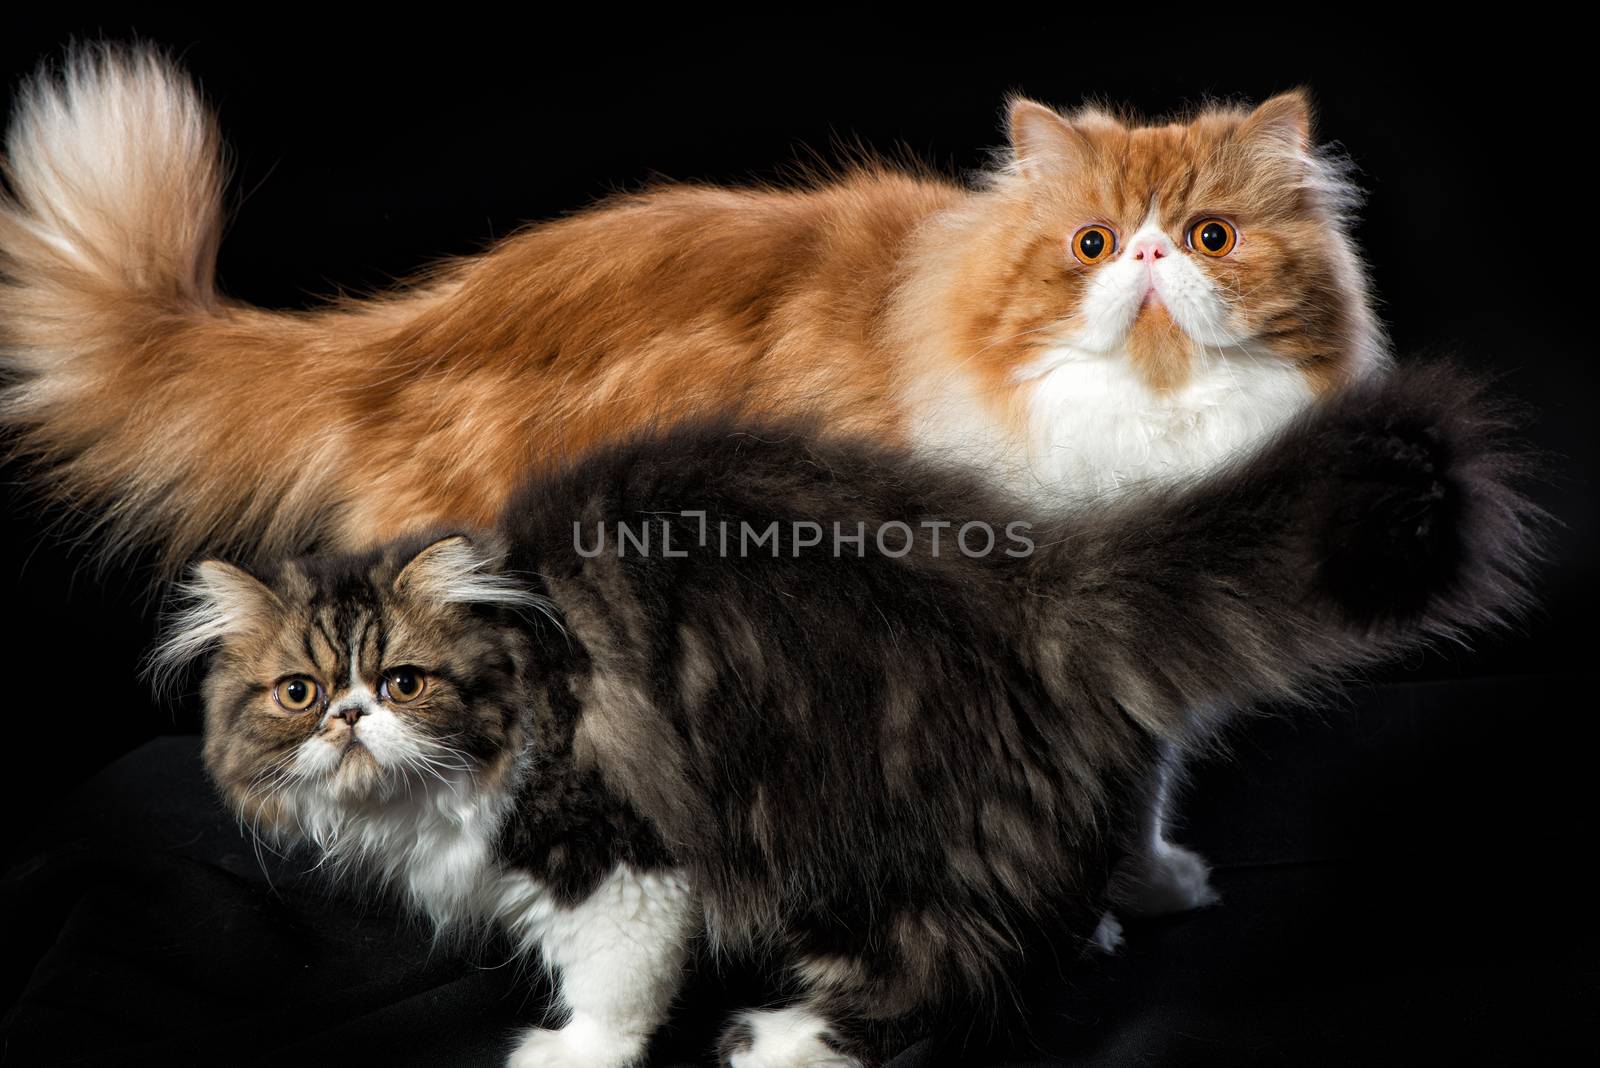 Two persian cats of different coloring by fotooxotnik